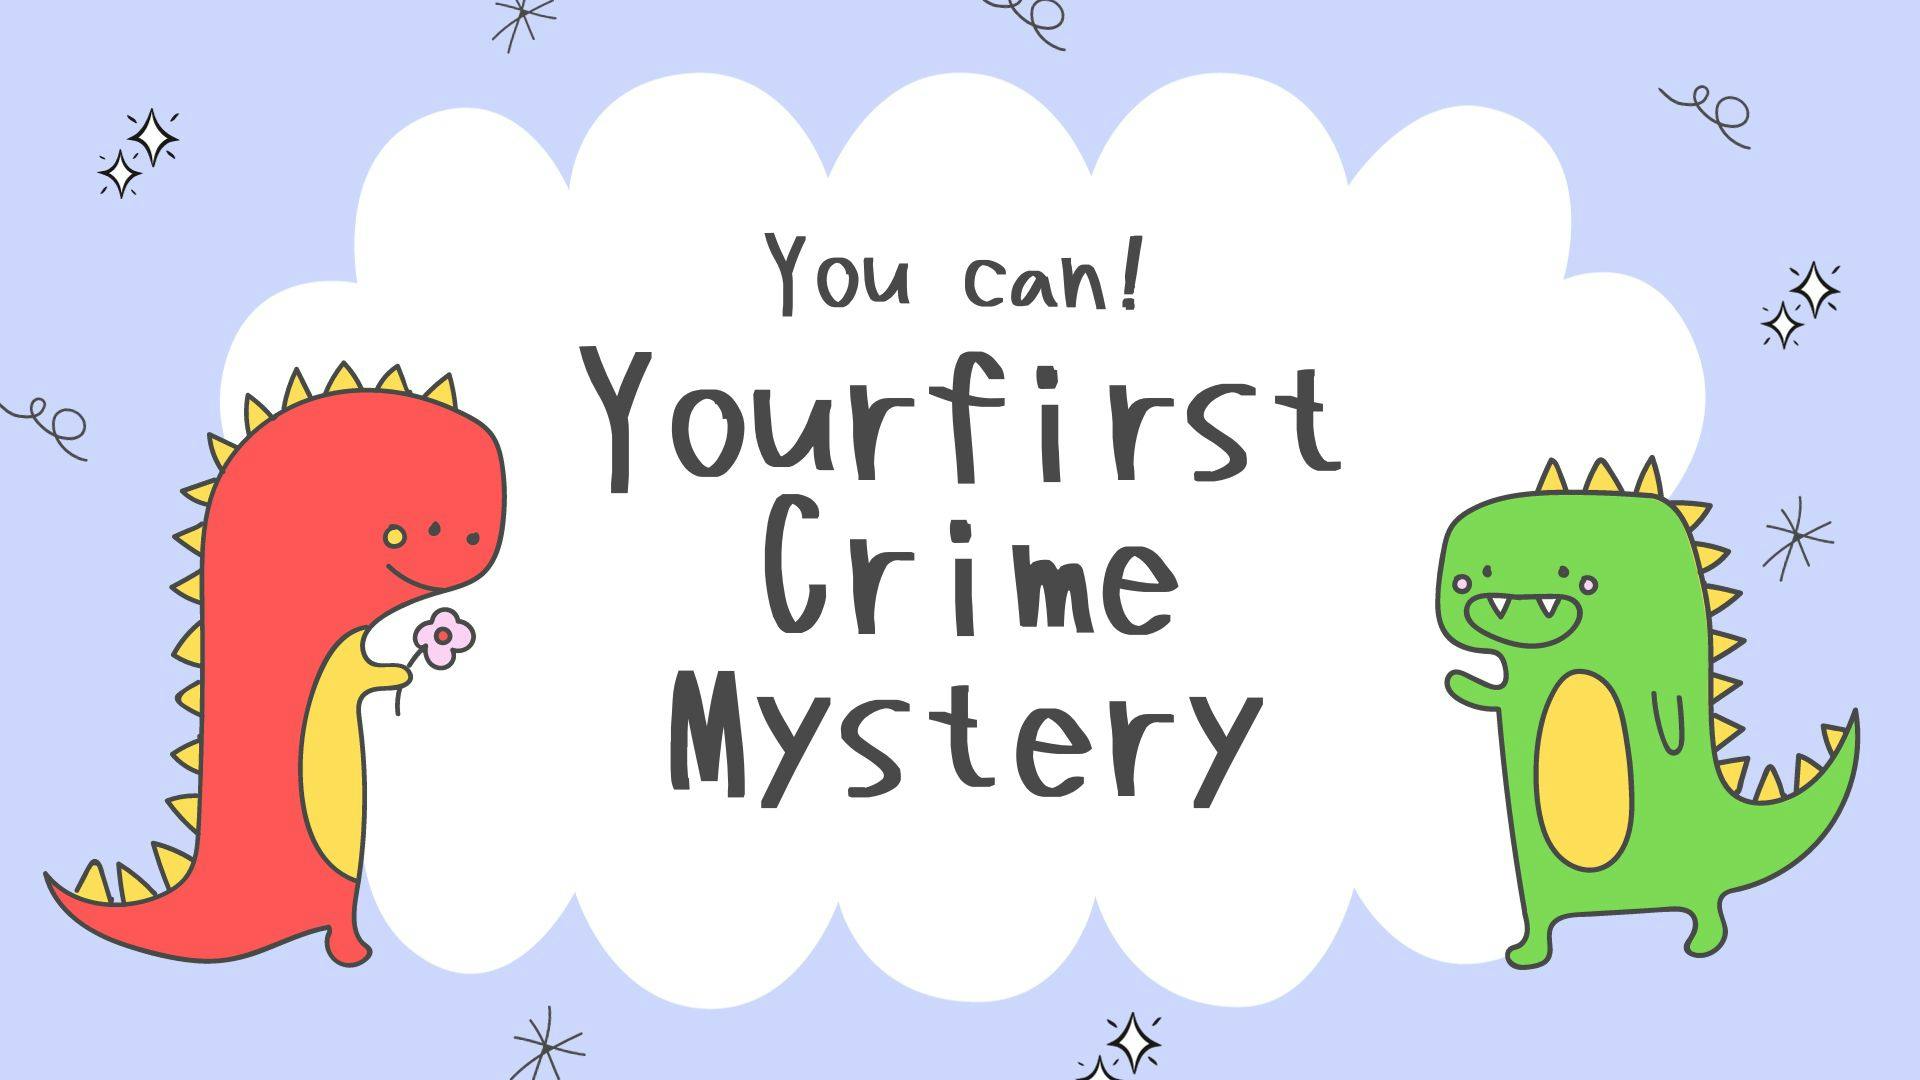 You can! Your first crime mystery